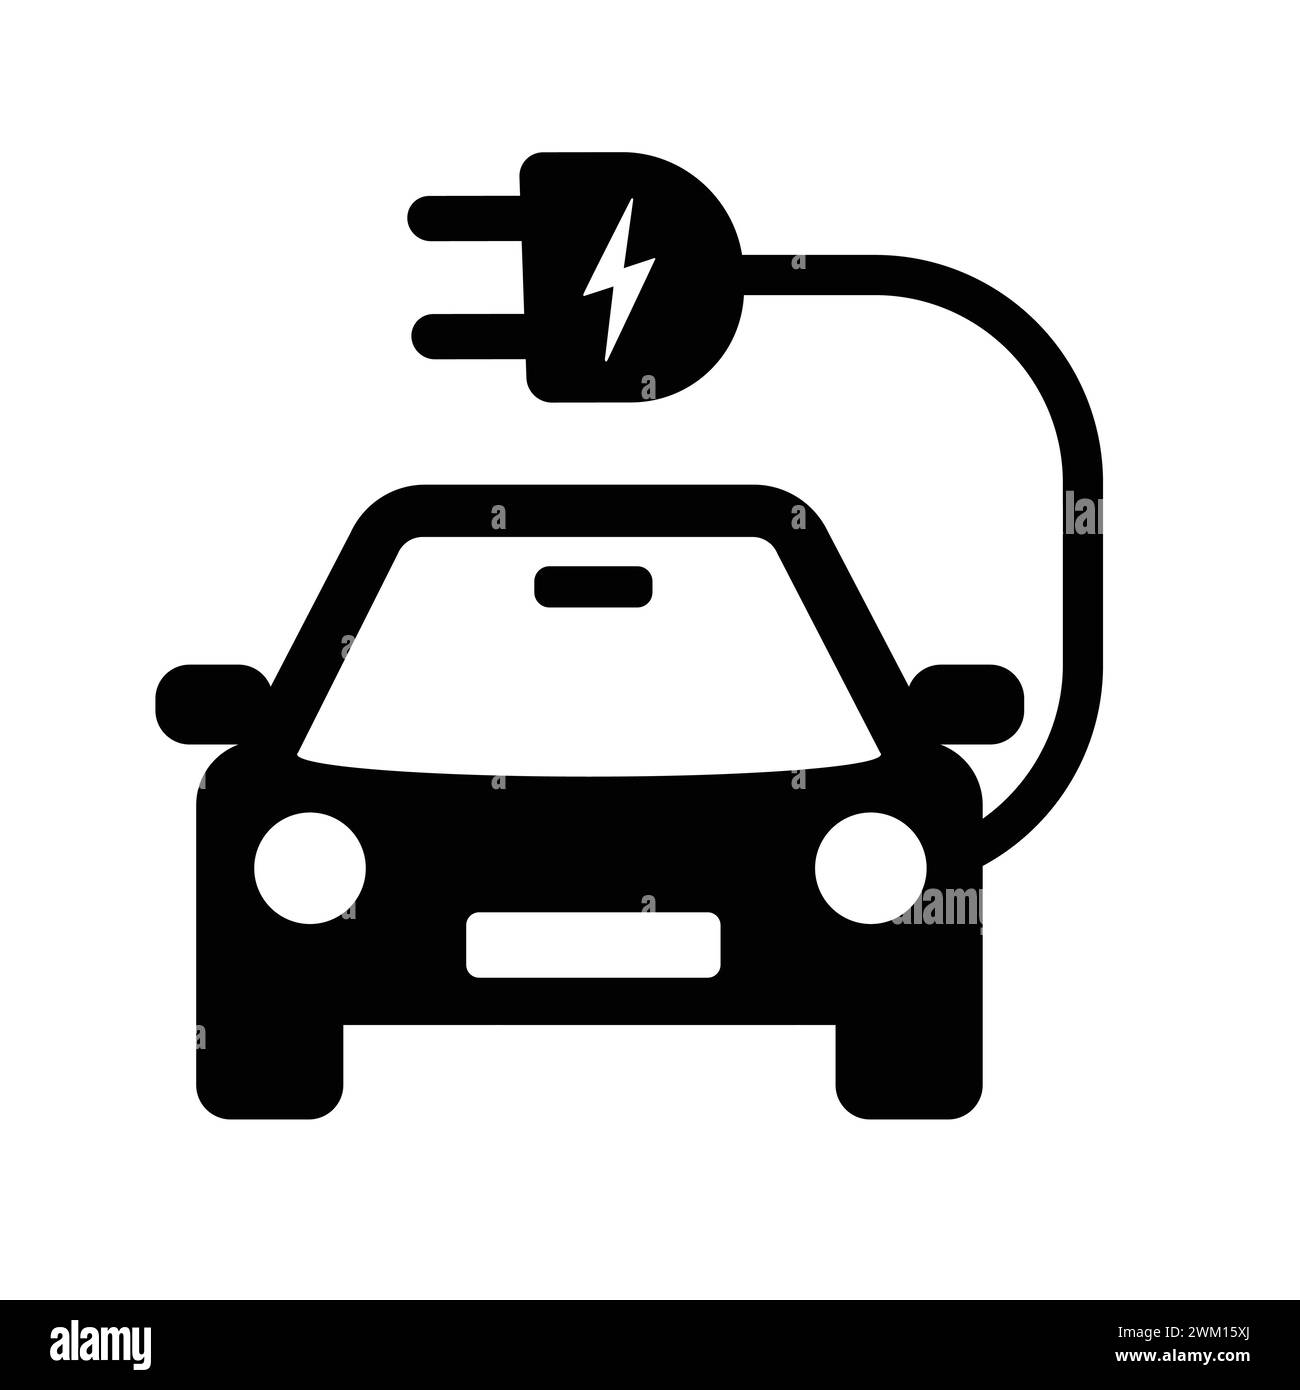 Electric Car With Plug Icon. Front-View Of An Electric Vehicle Symbol. Eco-Friendly Auto With Electric Battery. Electrical Fueling Plug Pictogram Stock Vector